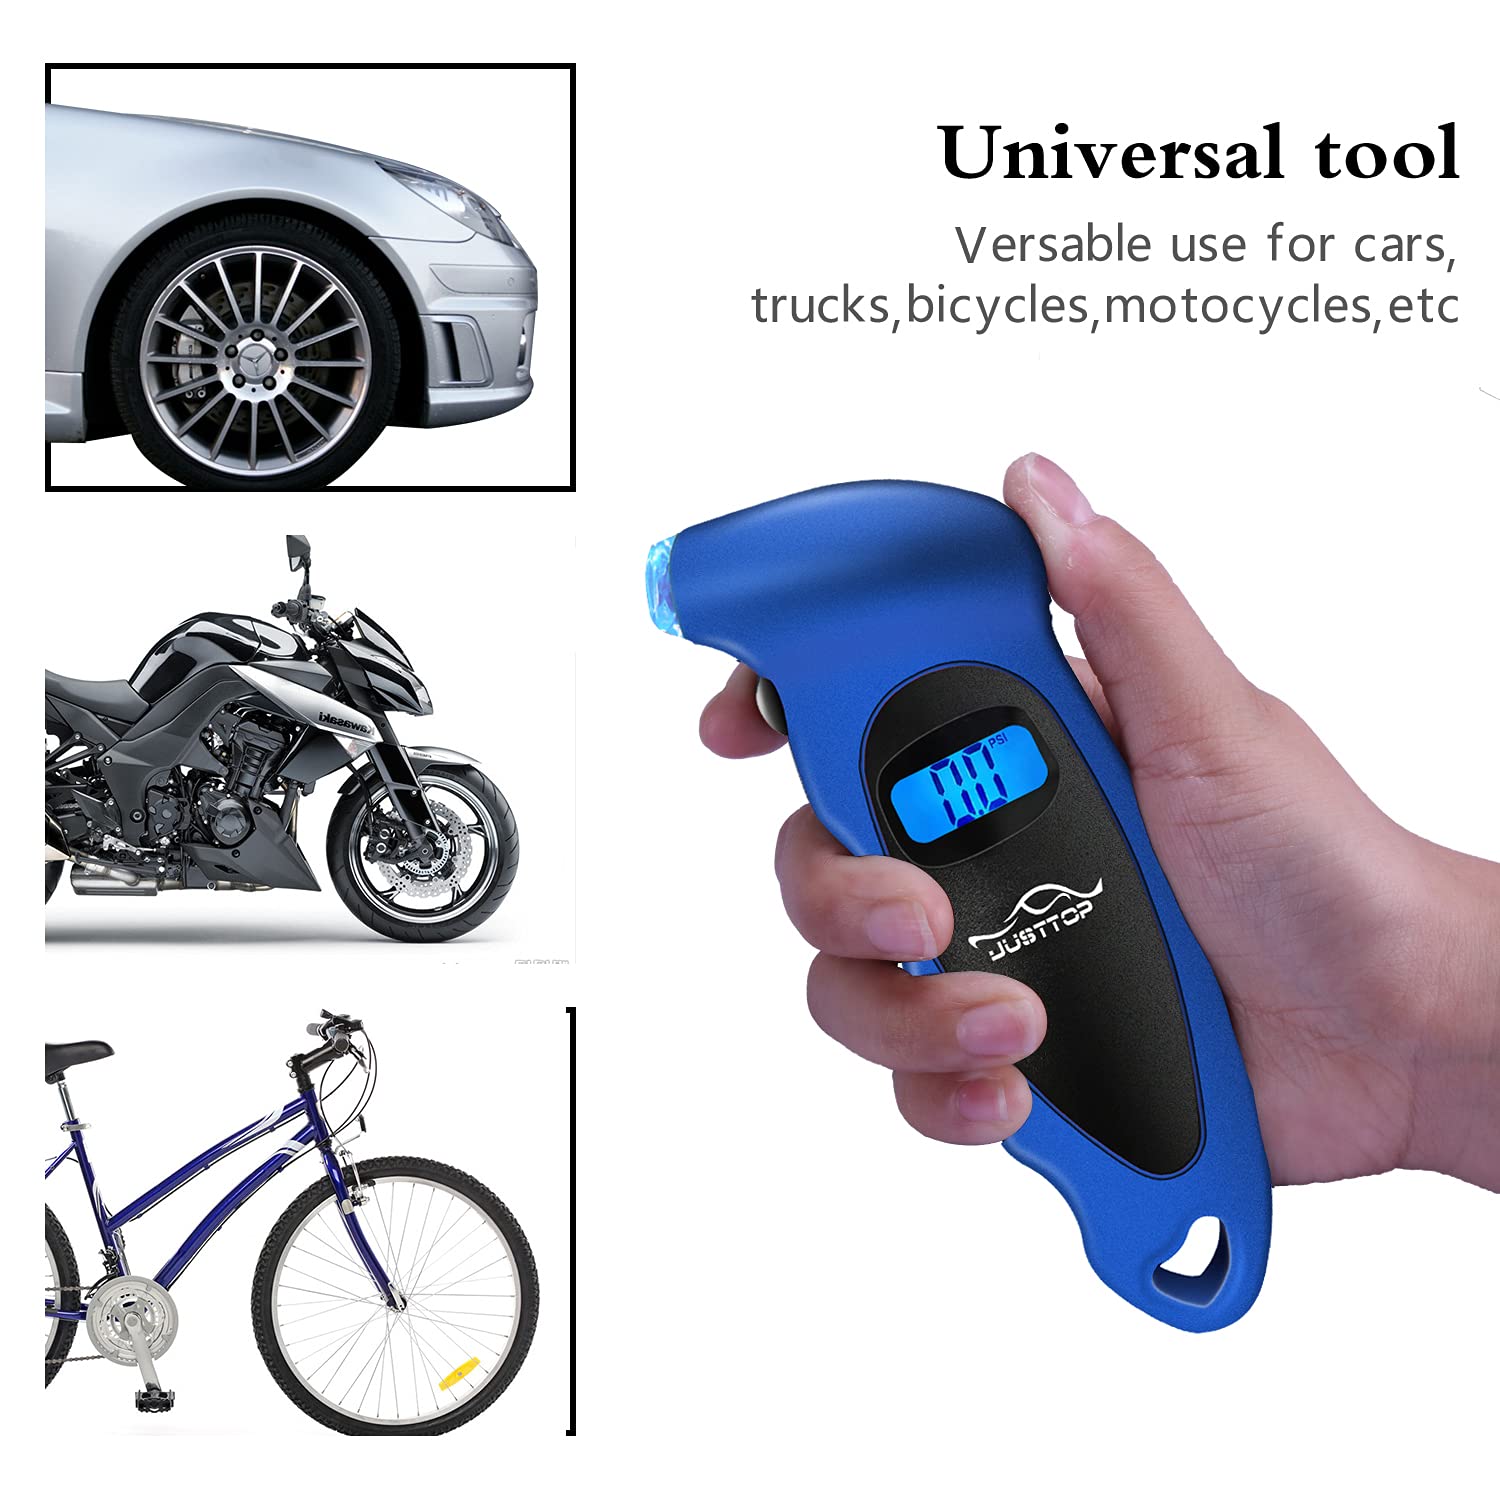 JUSTTOP 2 Pack Digital Tire Pressure Gauge, 150PSI 4 Setting for Cars, Trucks and Bicycles, Backlit LCD and Anti-Skid Grip for Easy and Accurate Reading(Blue)